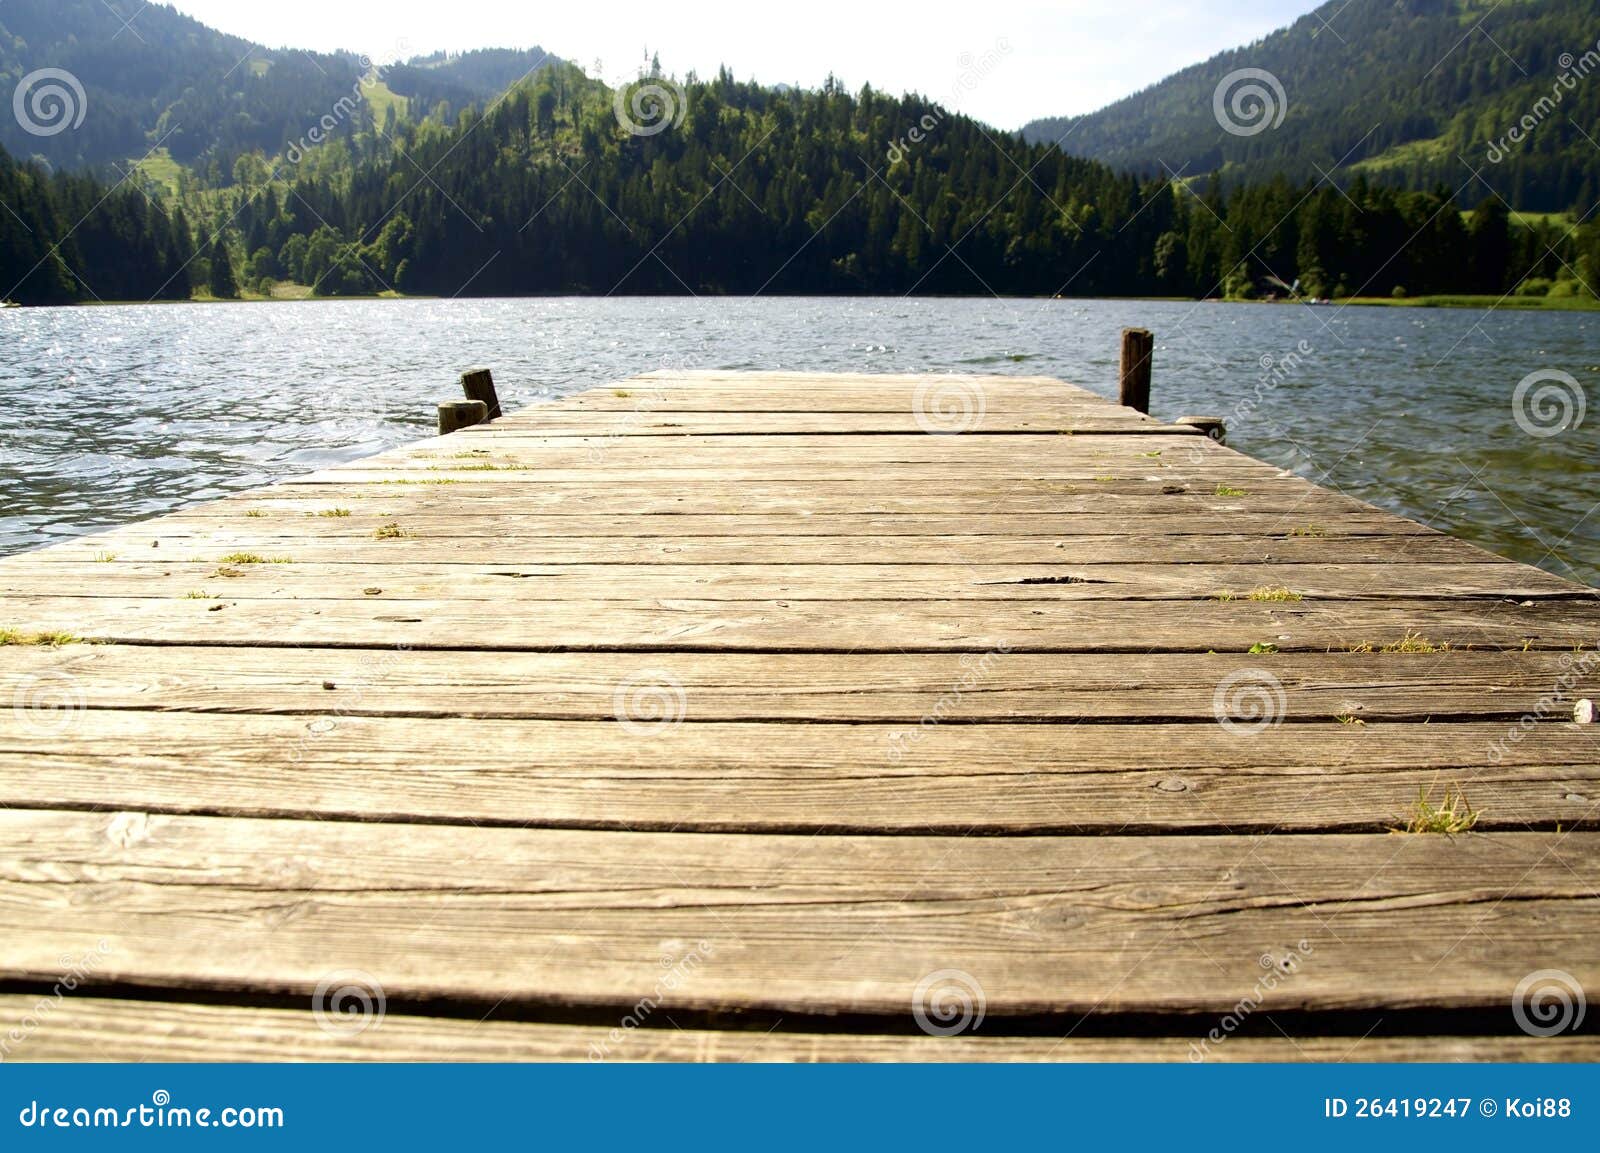 dock in a lake